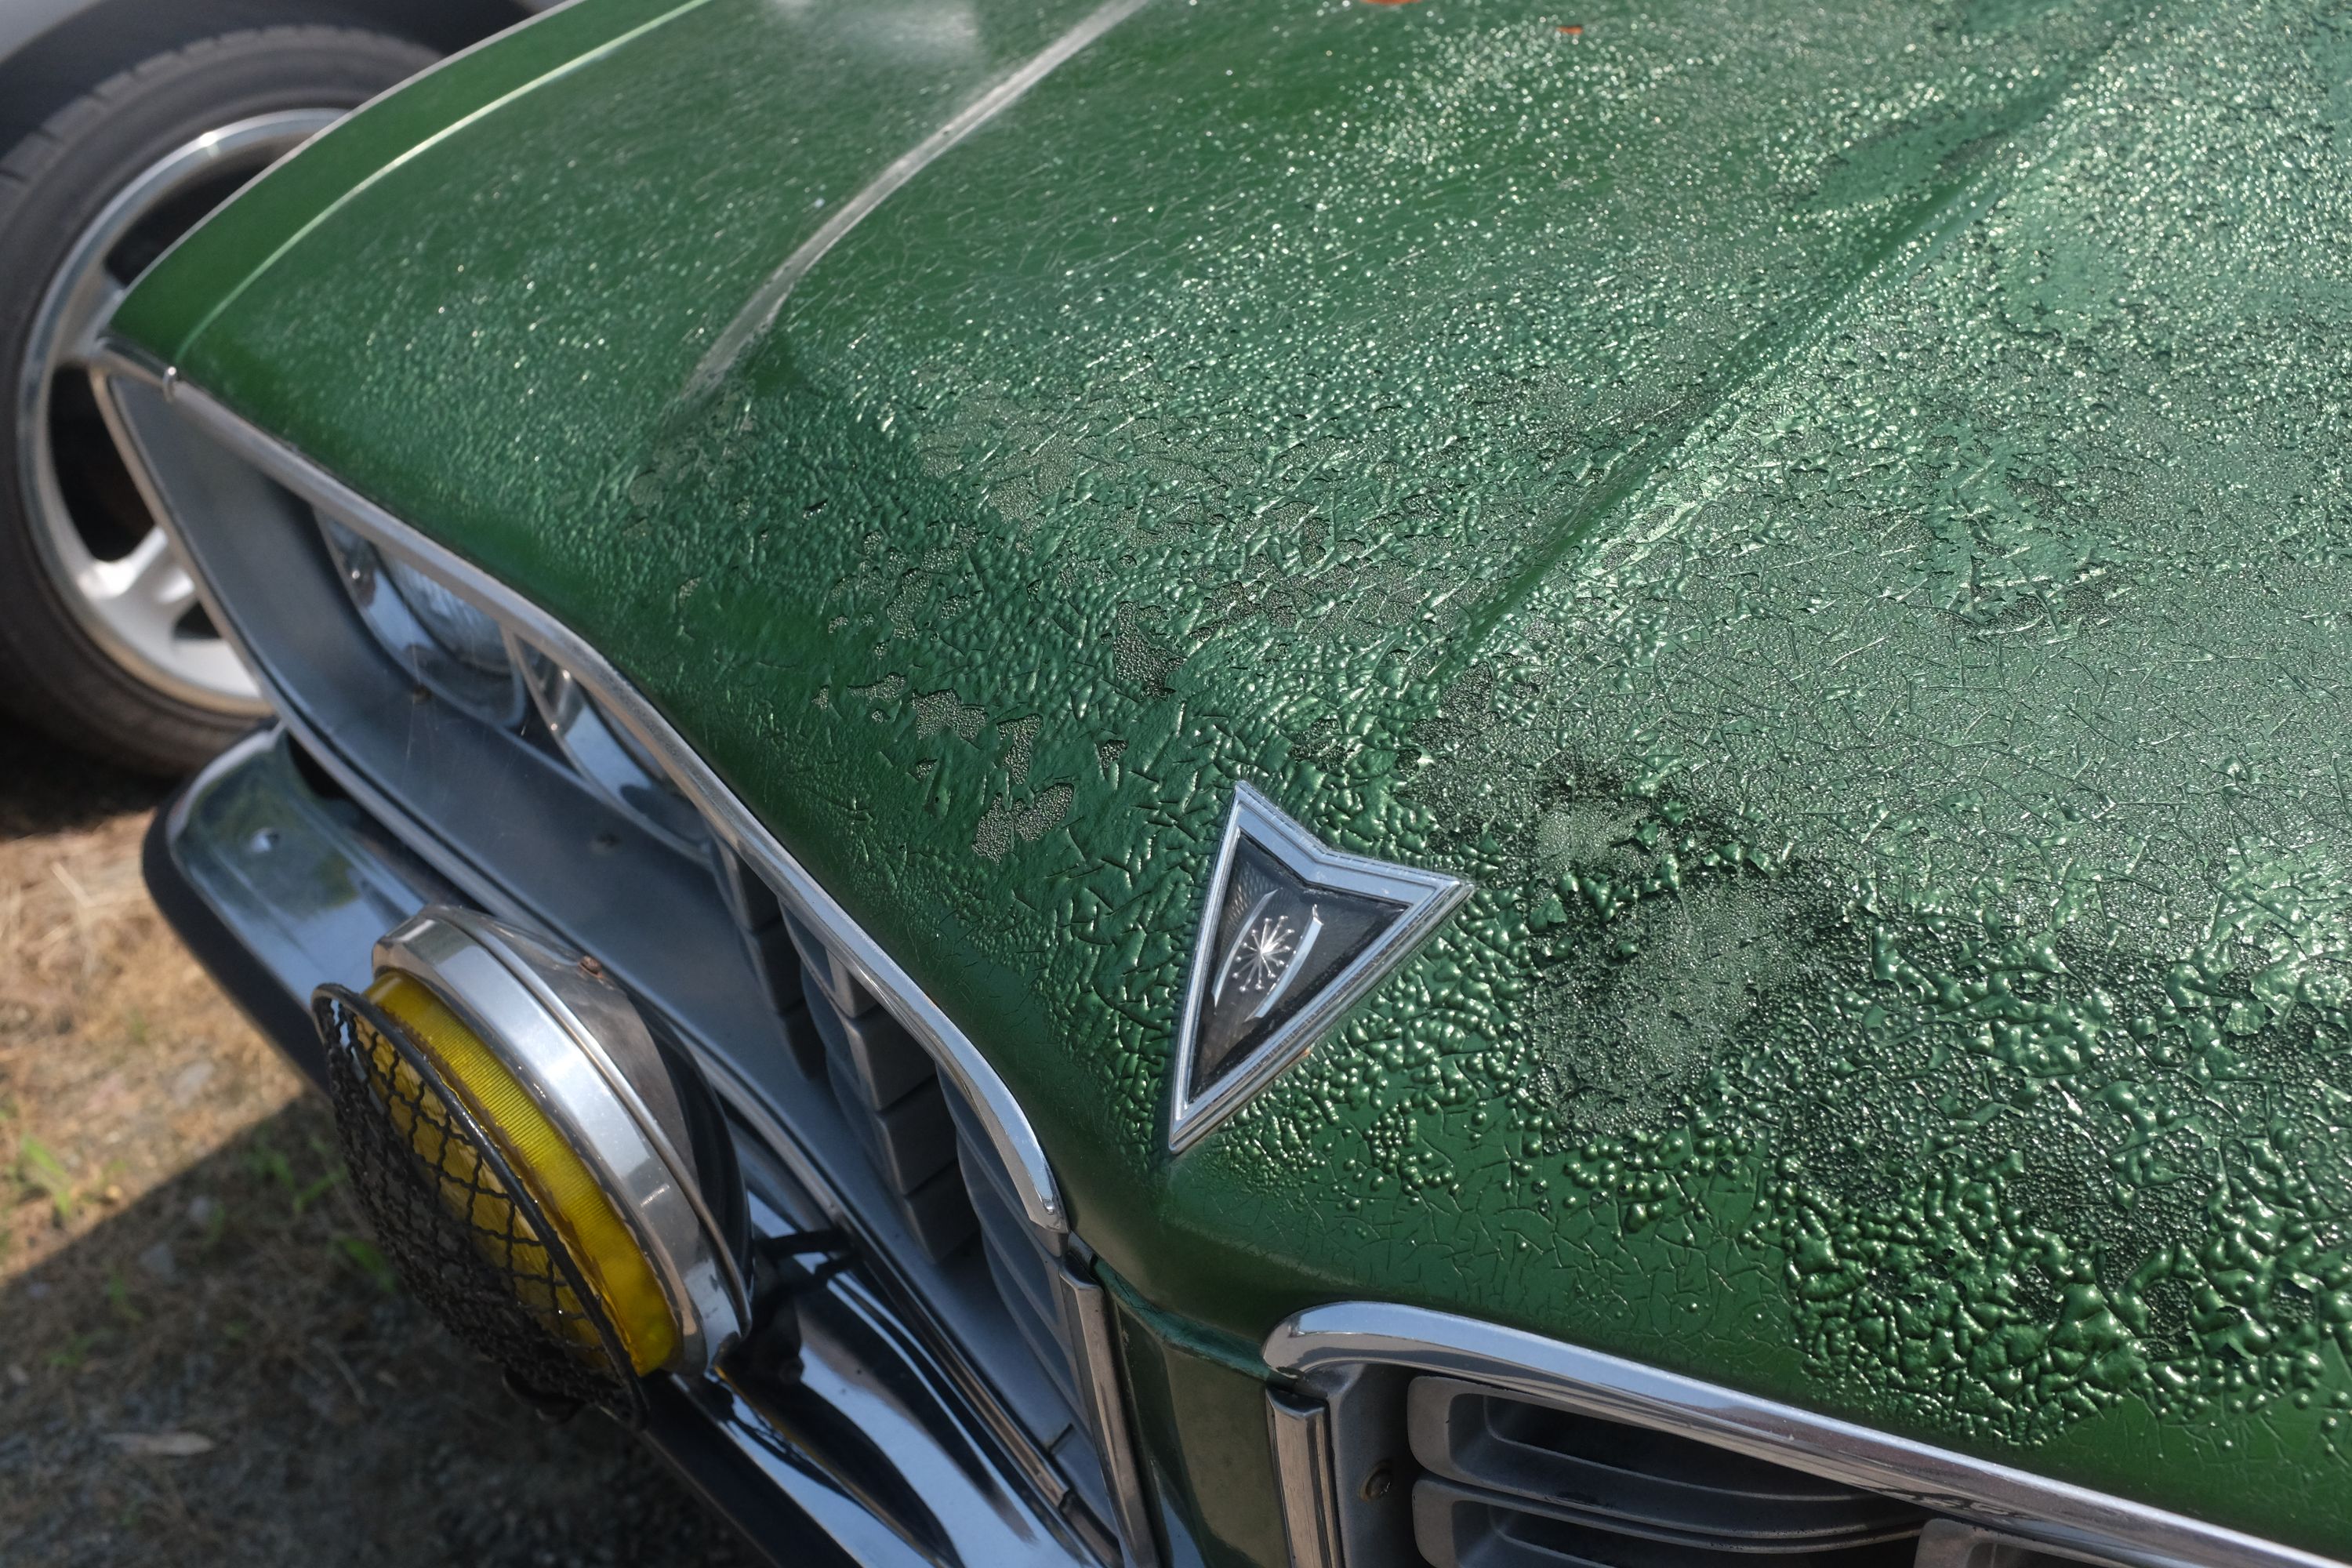 The sun-damaged green paint on the hood of an old car.